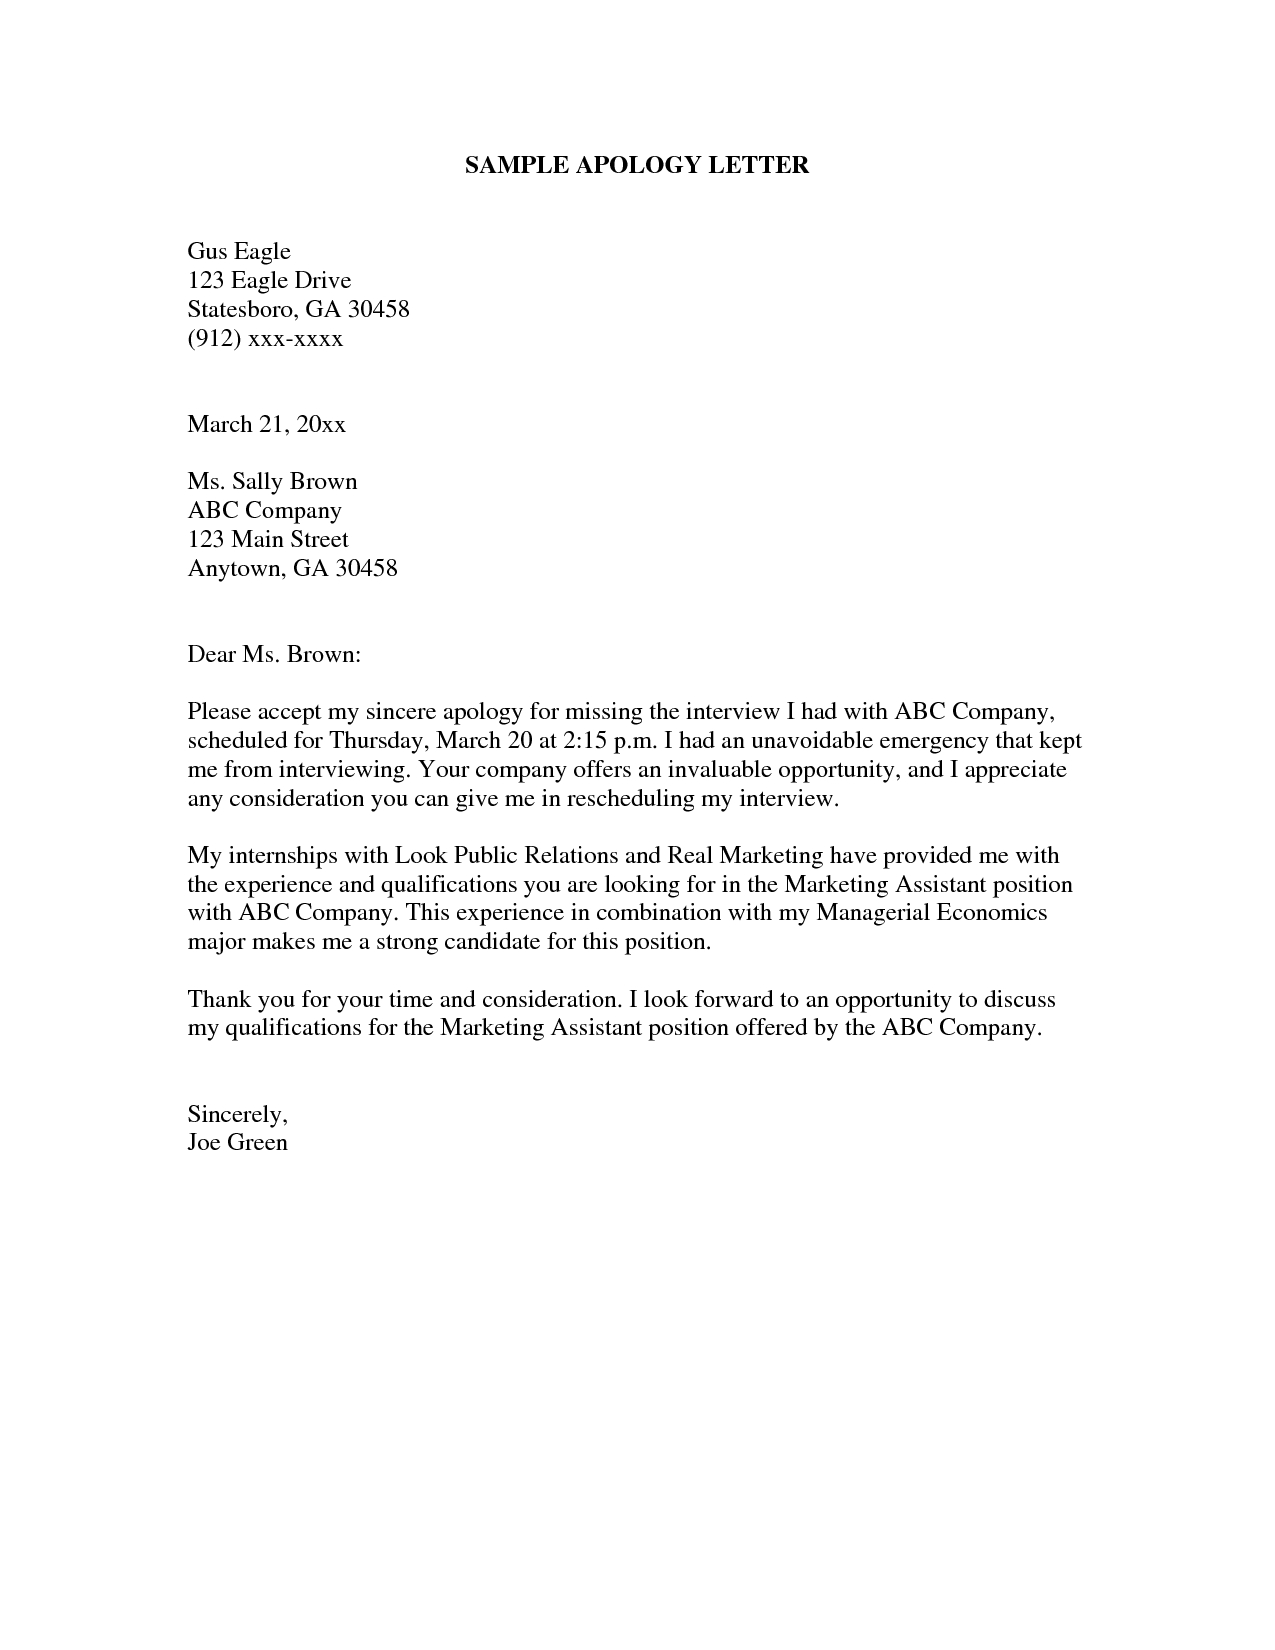 Format Of Apologize Letter Best Professional Apology Free Sample 